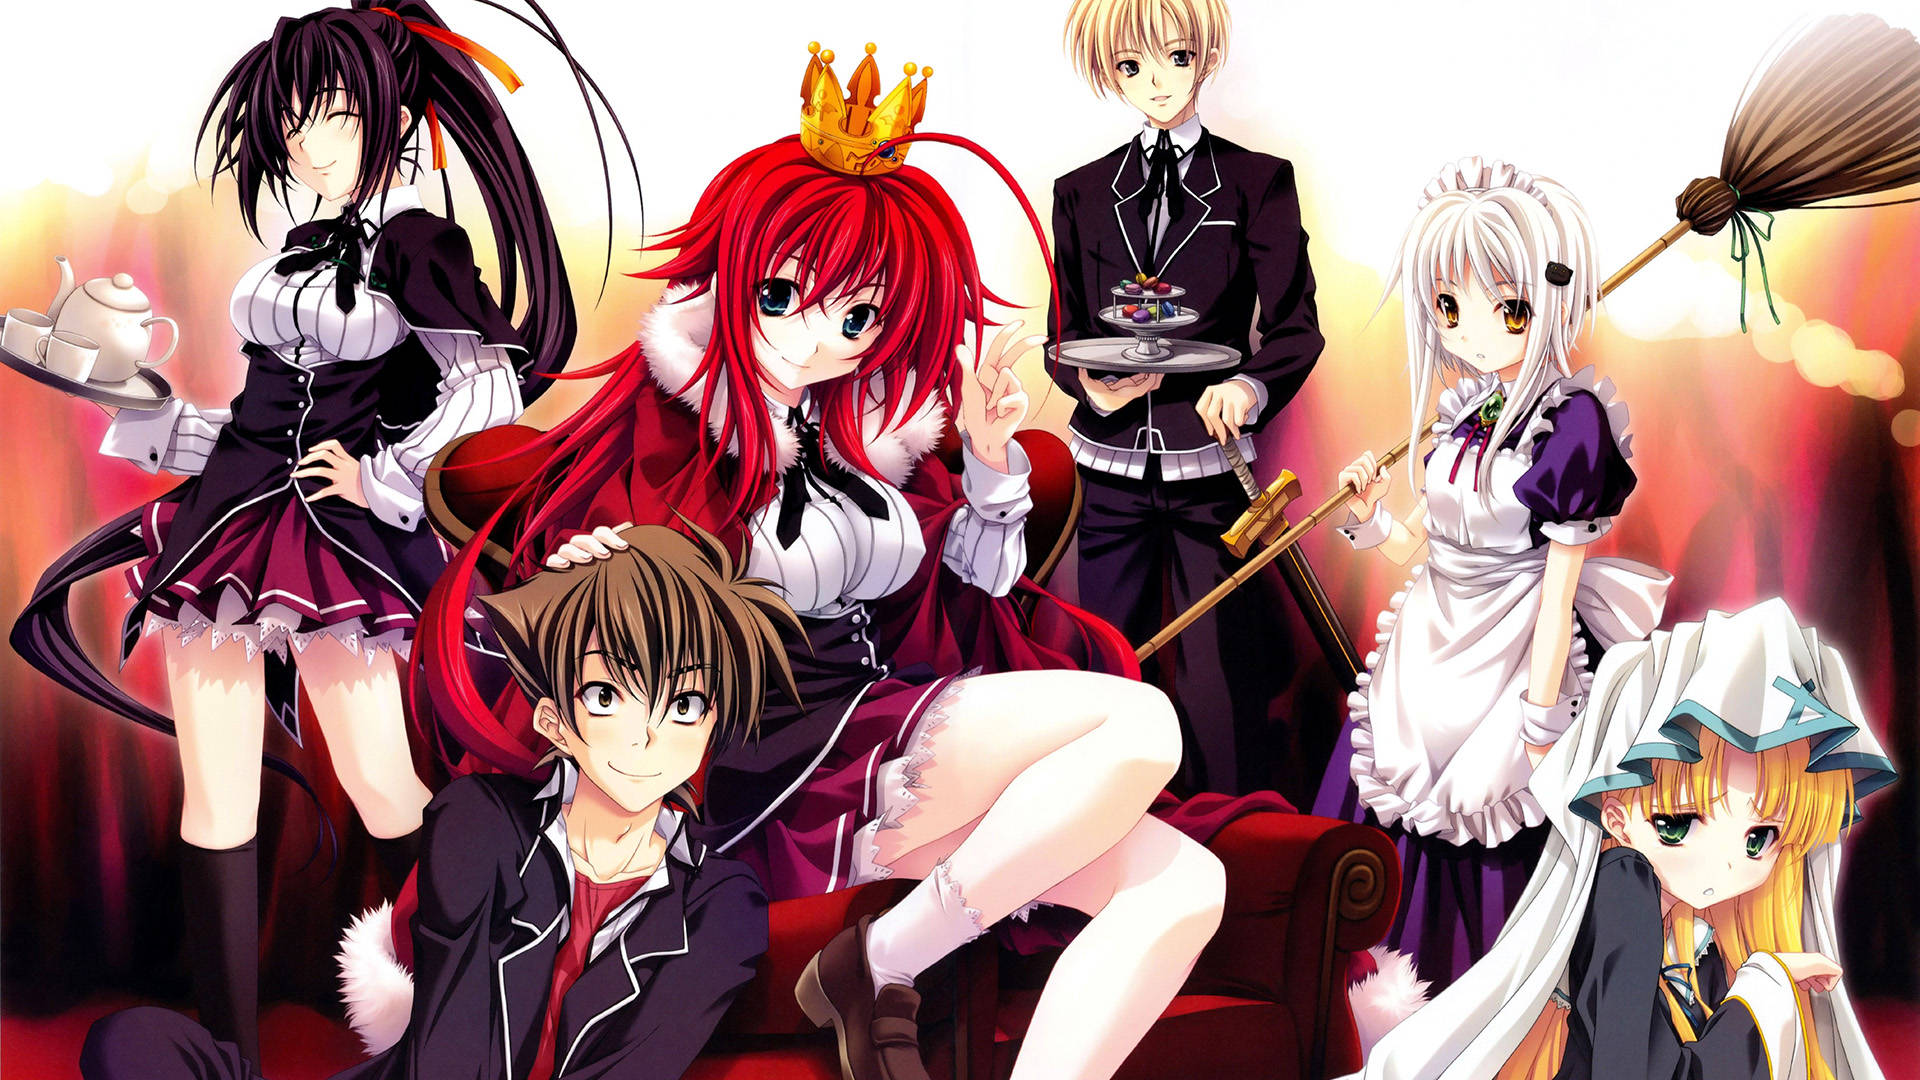 Rias Chess Pieces Highschool Dxd